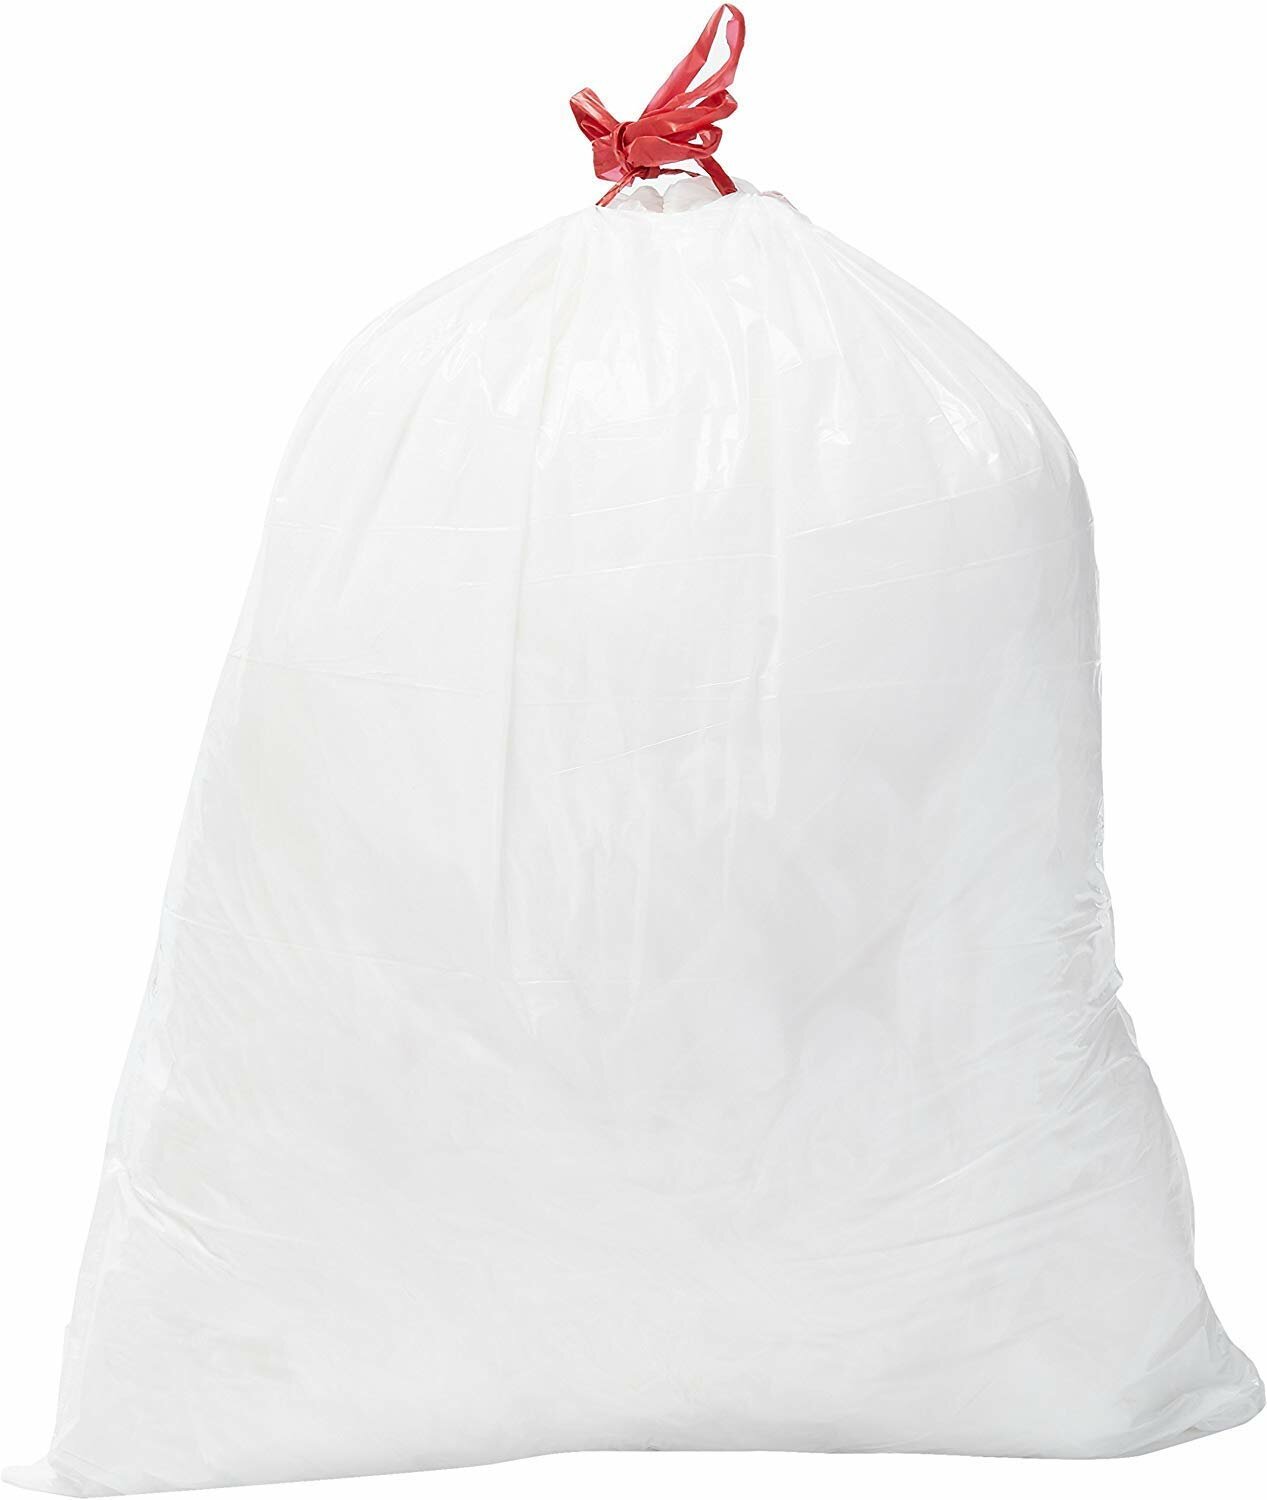 180-Count 4 Gallon Garbage Bags, Drawstring Small Trash Bags for Bathroom,  Kitchen, and Office